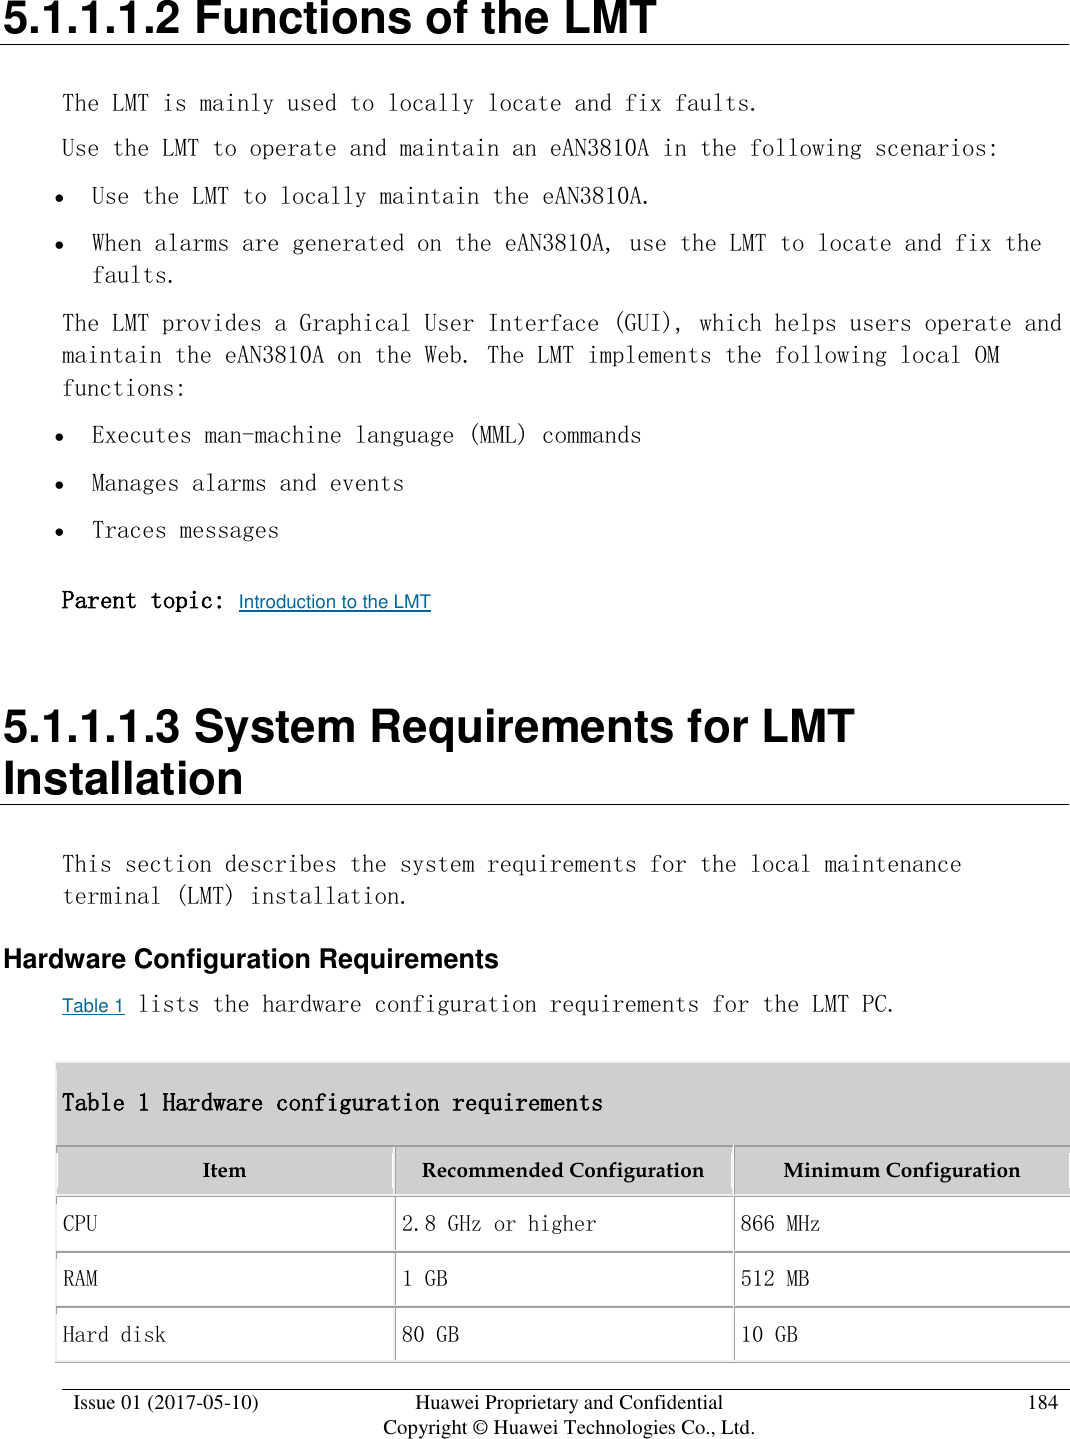  Issue 01 (2017-05-10) Huawei Proprietary and Confidential      Copyright © Huawei Technologies Co., Ltd. 184  5.1.1.1.2 Functions of the LMT The LMT is mainly used to locally locate and fix faults. Use the LMT to operate and maintain an eAN3810A in the following scenarios:   Use the LMT to locally maintain the eAN3810A.  When alarms are generated on the eAN3810A, use the LMT to locate and fix the faults. The LMT provides a Graphical User Interface (GUI), which helps users operate and maintain the eAN3810A on the Web. The LMT implements the following local OM functions:   Executes man-machine language (MML) commands  Manages alarms and events  Traces messages Parent topic: Introduction to the LMT 5.1.1.1.3 System Requirements for LMT Installation This section describes the system requirements for the local maintenance terminal (LMT) installation. Hardware Configuration Requirements Table 1 lists the hardware configuration requirements for the LMT PC. Table 1 Hardware configuration requirements Item Recommended Configuration Minimum Configuration CPU 2.8 GHz or higher 866 MHz RAM 1 GB 512 MB Hard disk 80 GB 10 GB 